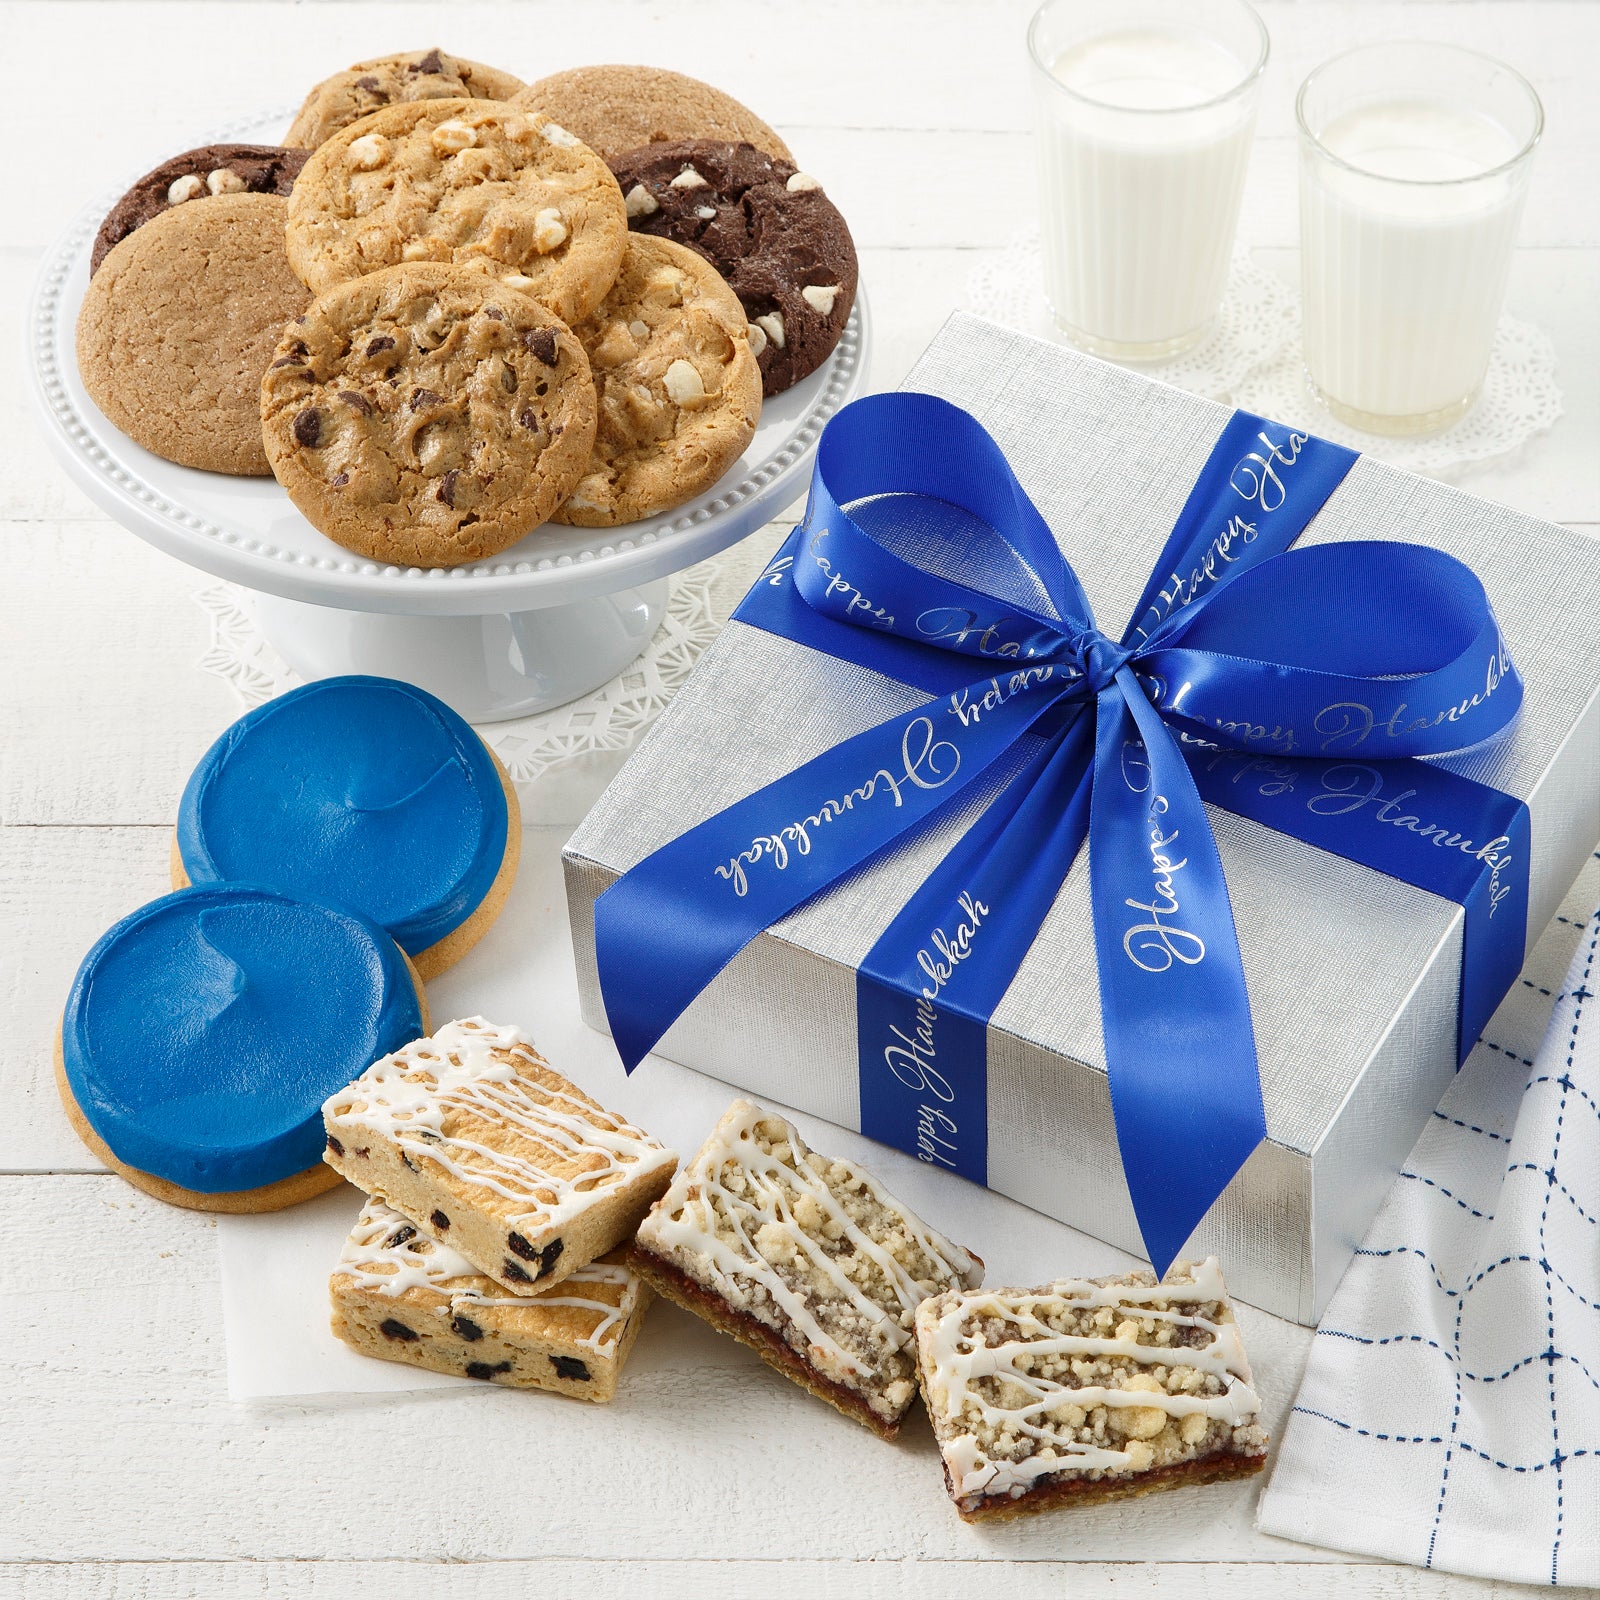 A silver gift box tied with a Happy Hanukkah blue and silver ribbon and surrounded by an assortment of original cookies, fruit bars, and two blue frosted cookies